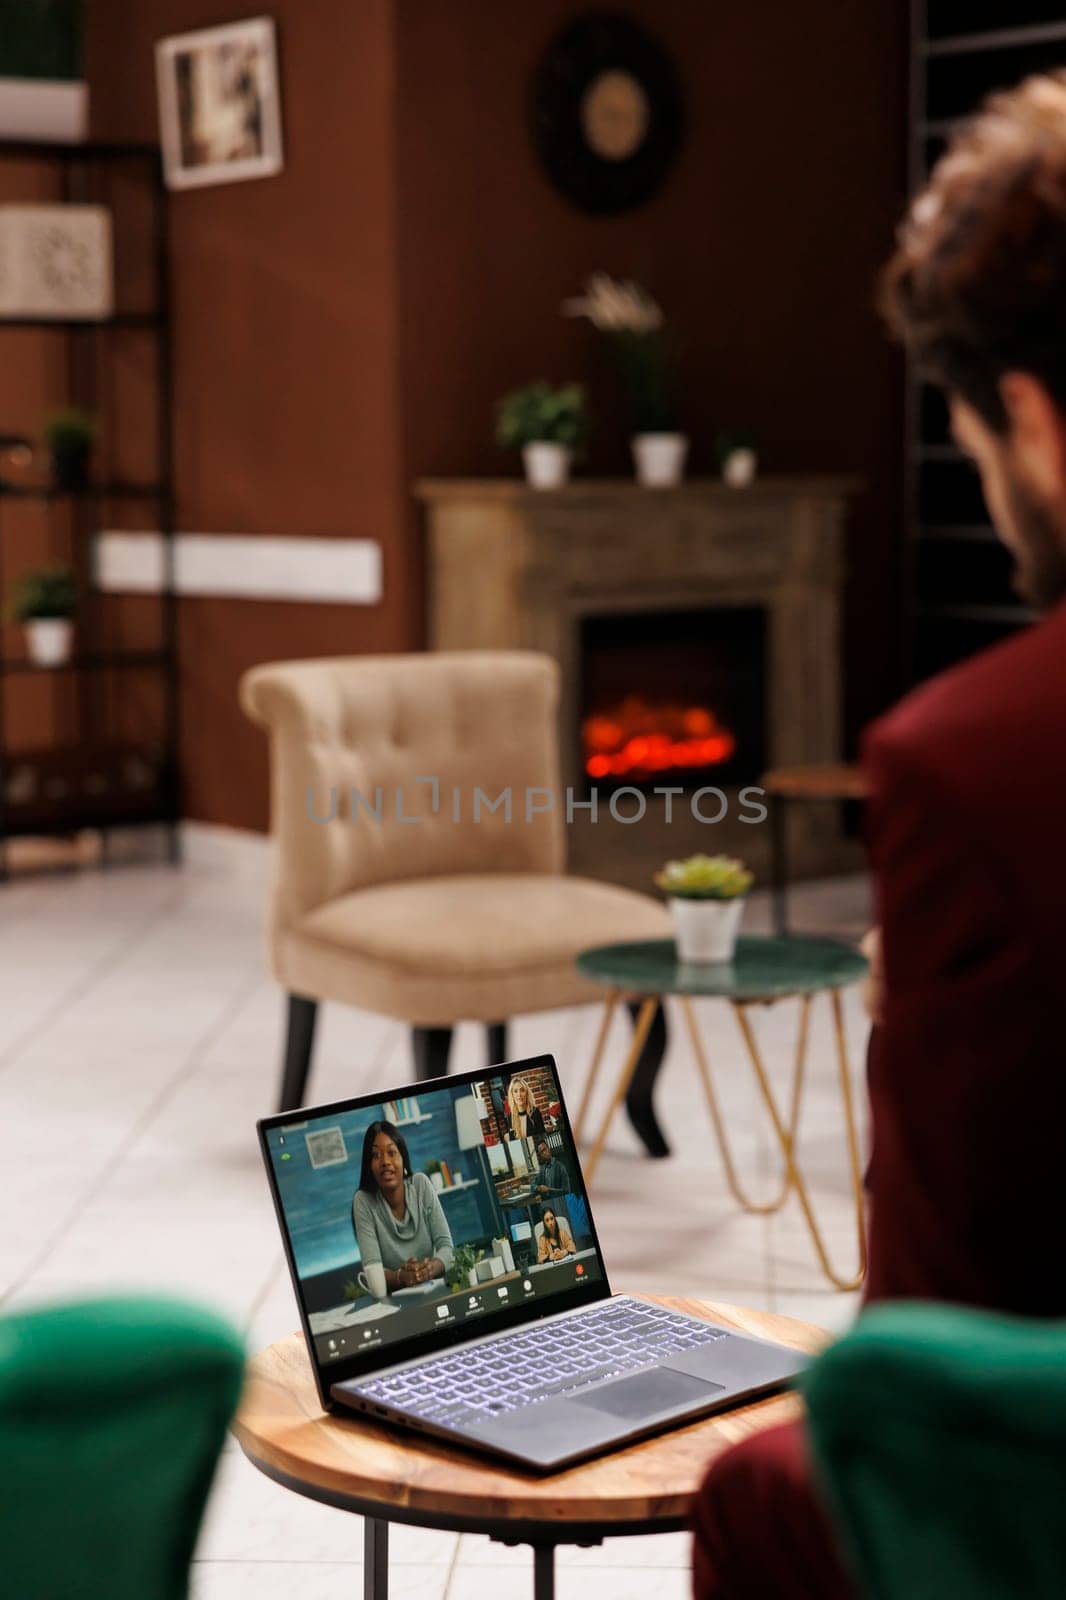 White collar worker on videocall in lobby, attending business conference online in lounge area at luxury hotel. Entrepreneur using laptop to chat on teleconference, waiting for check in.